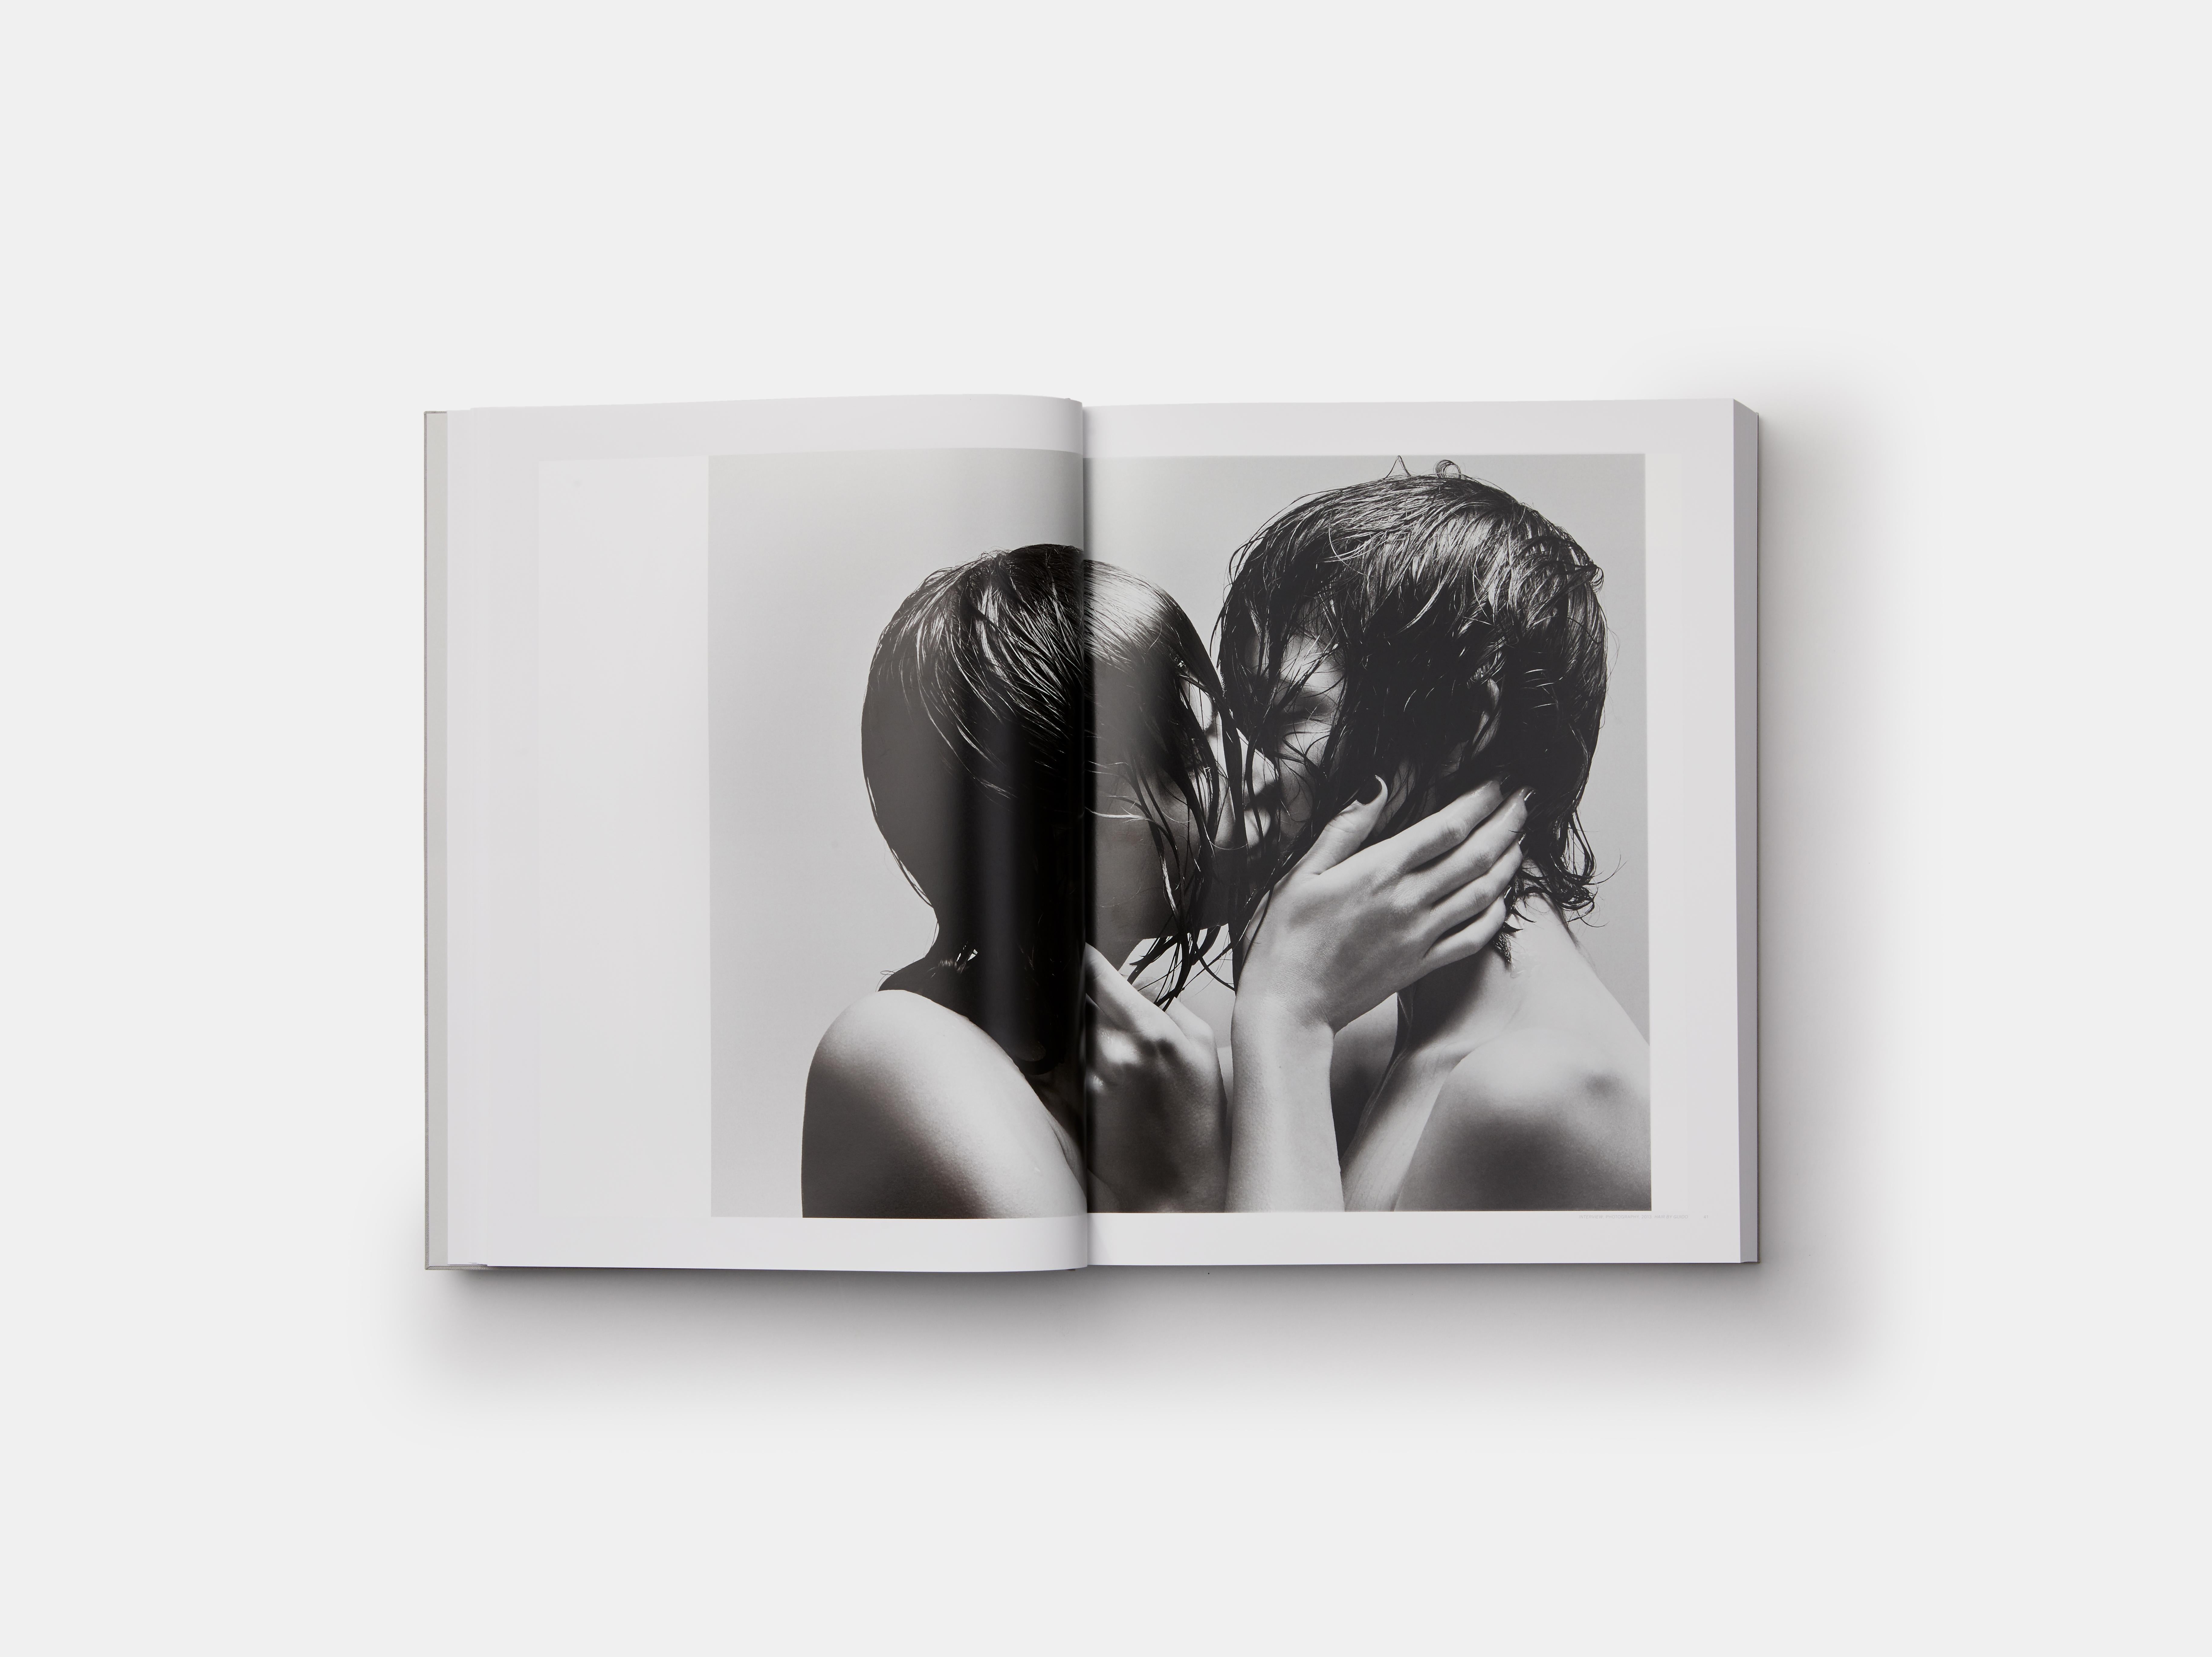 The much-anticipated book from one of the most sought-after art directors in the world, showcasing 30+ years of his talent

Part design manual, part manifesto, the first career retrospective of Fabien Baron, whom vanity fair called 'the most